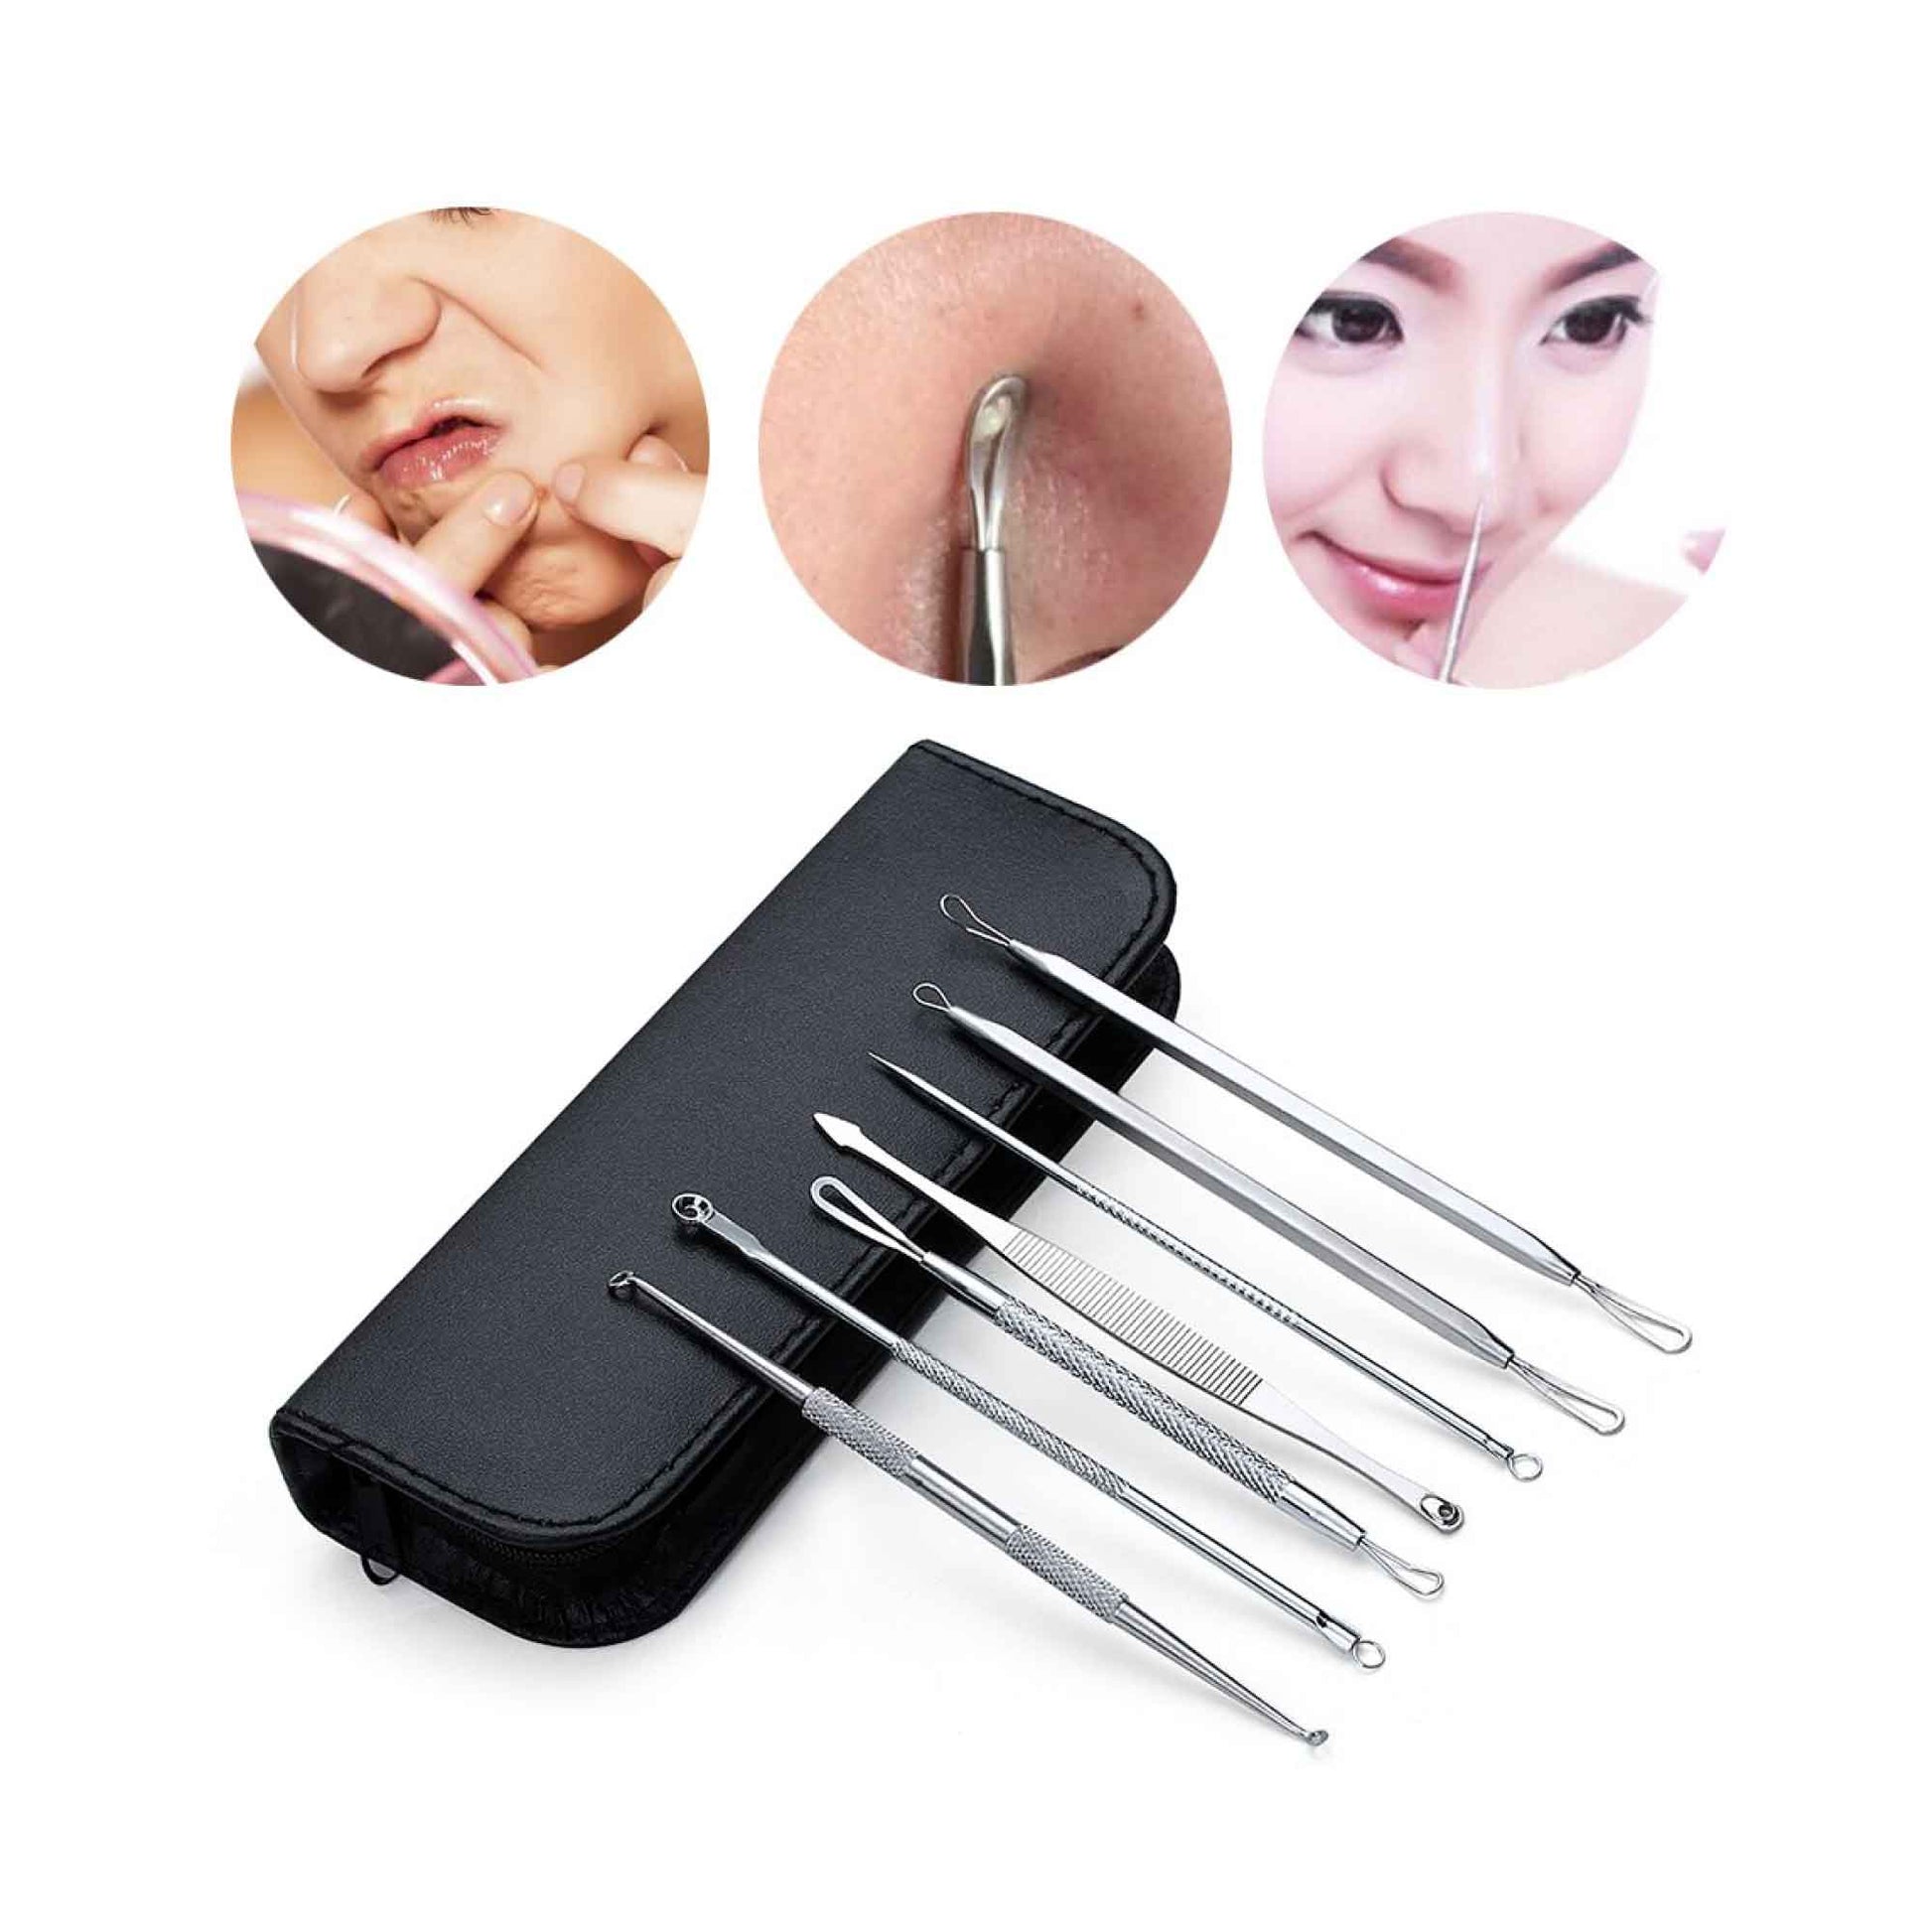 Blackhead Remover 7 Piece Tool Kit For Pimple Extraction Blemish Suction Removal